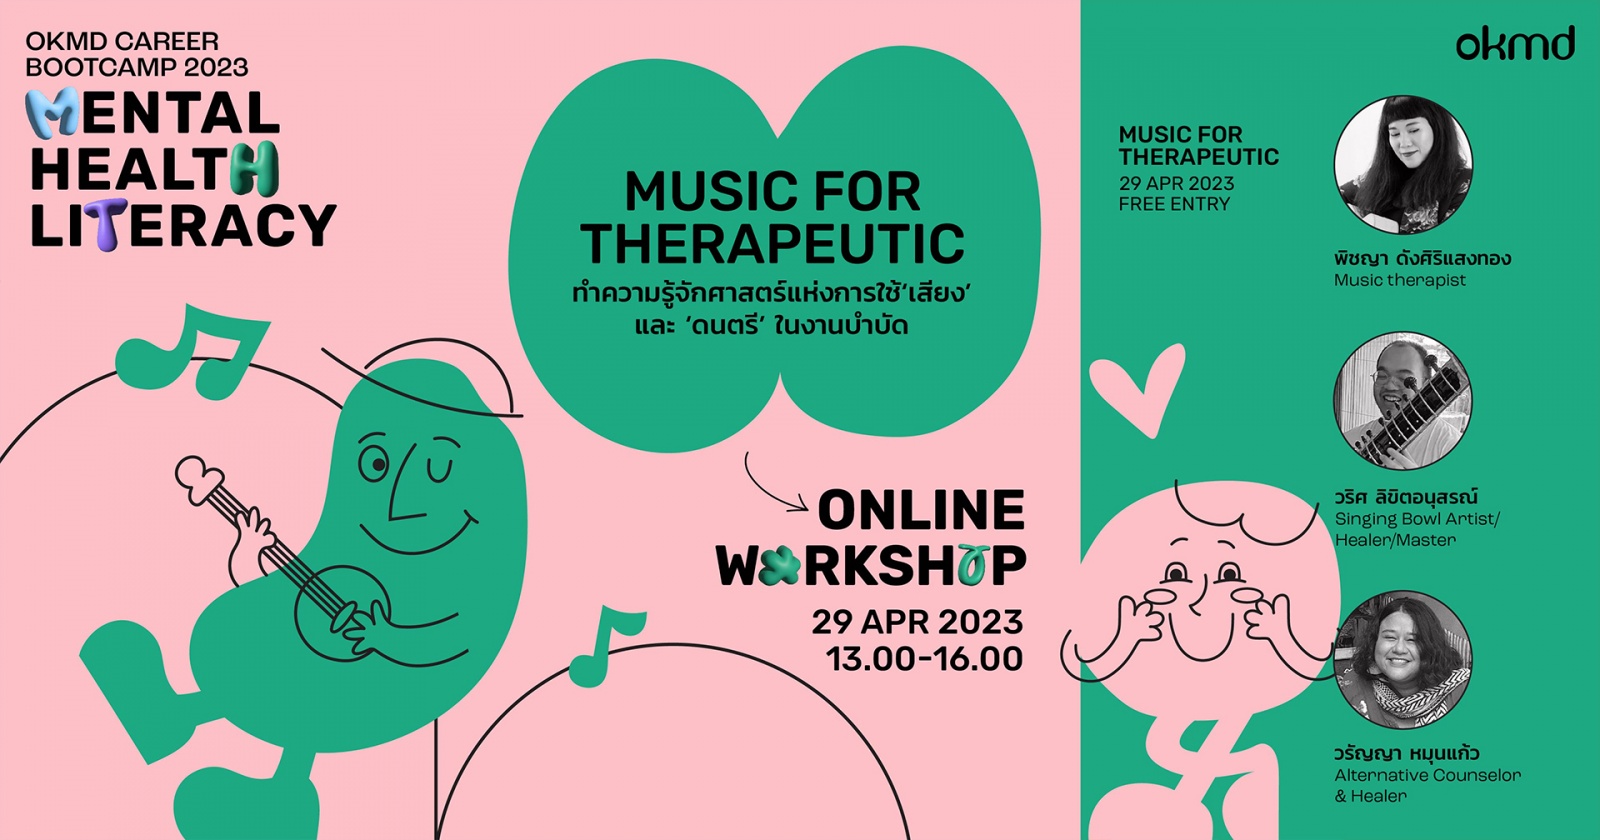 OKMD Career Bootcamp 2023 : Mental Health Literacy Online Workshop 02: Music for therapeutic